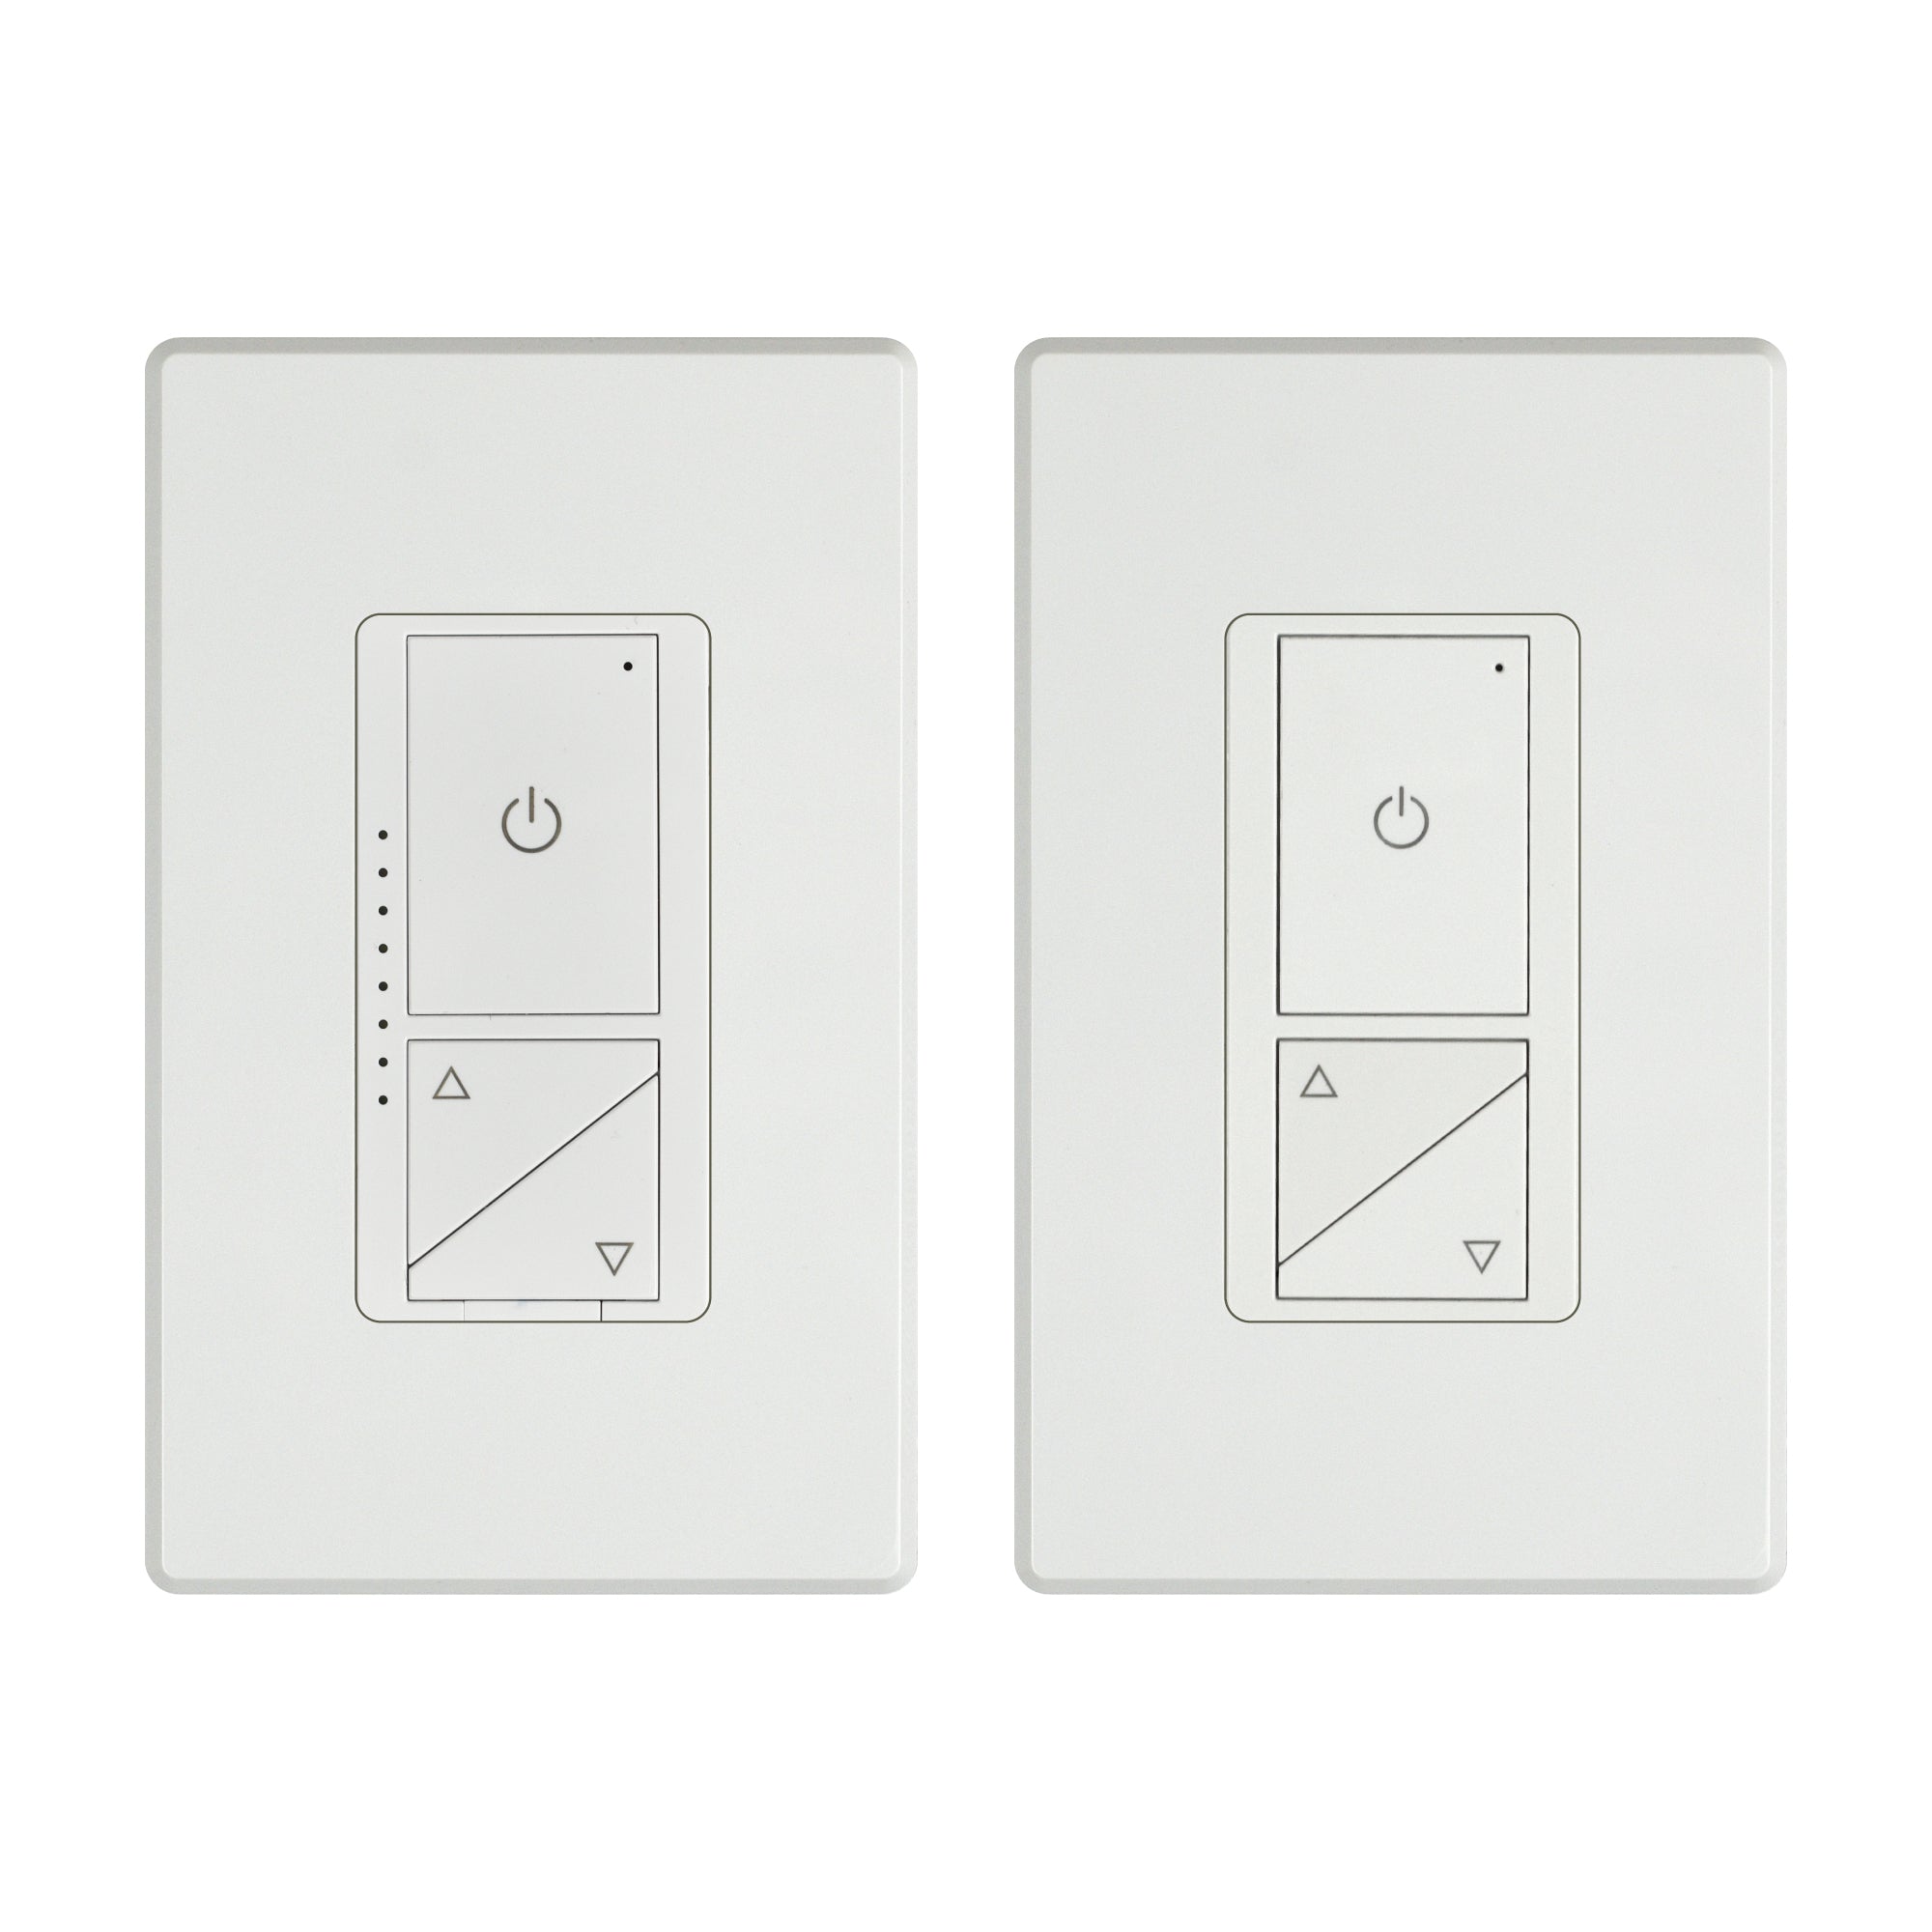 CLEANLIFE® 24-48V PWM Wired Dimmer Switch with 3-Way Wireless Switch/Remote (Wall Plates Included)